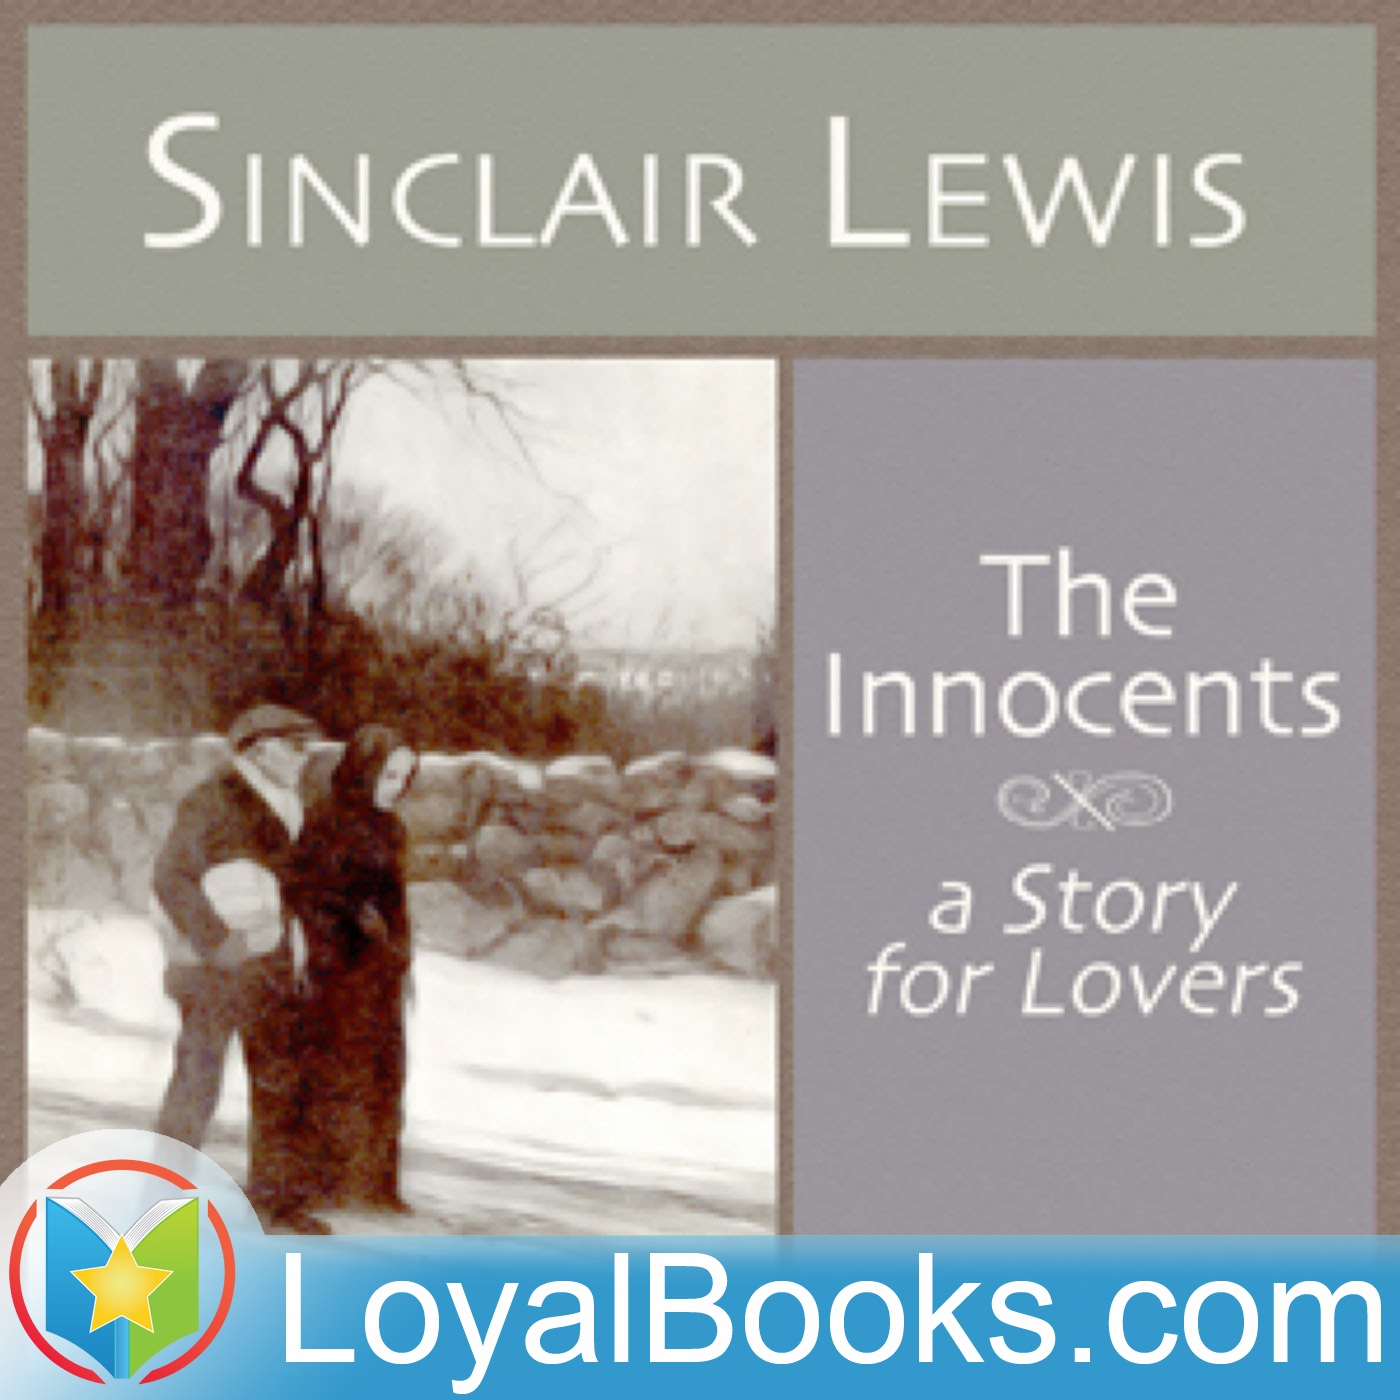 The Innocents, A Story for Lovers by Sinclair Lewis